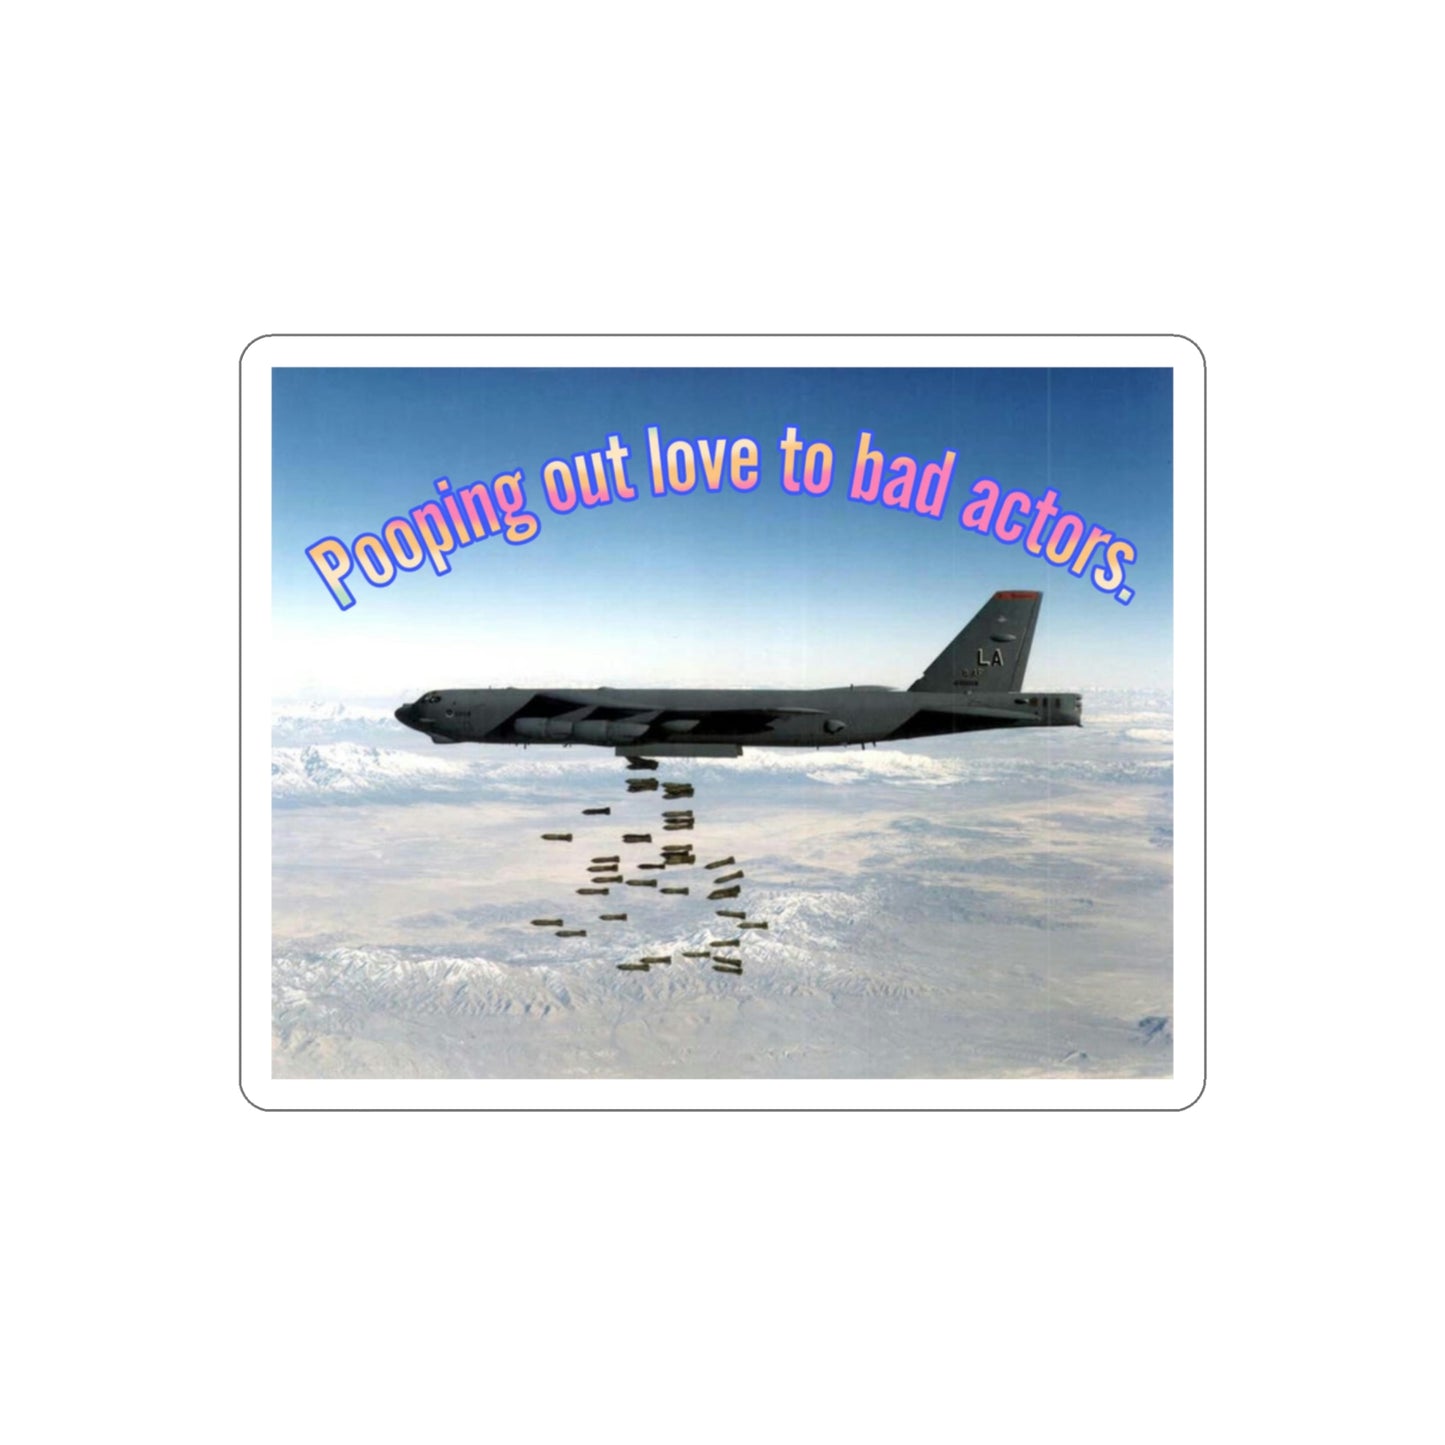 B-52 Pooping out love